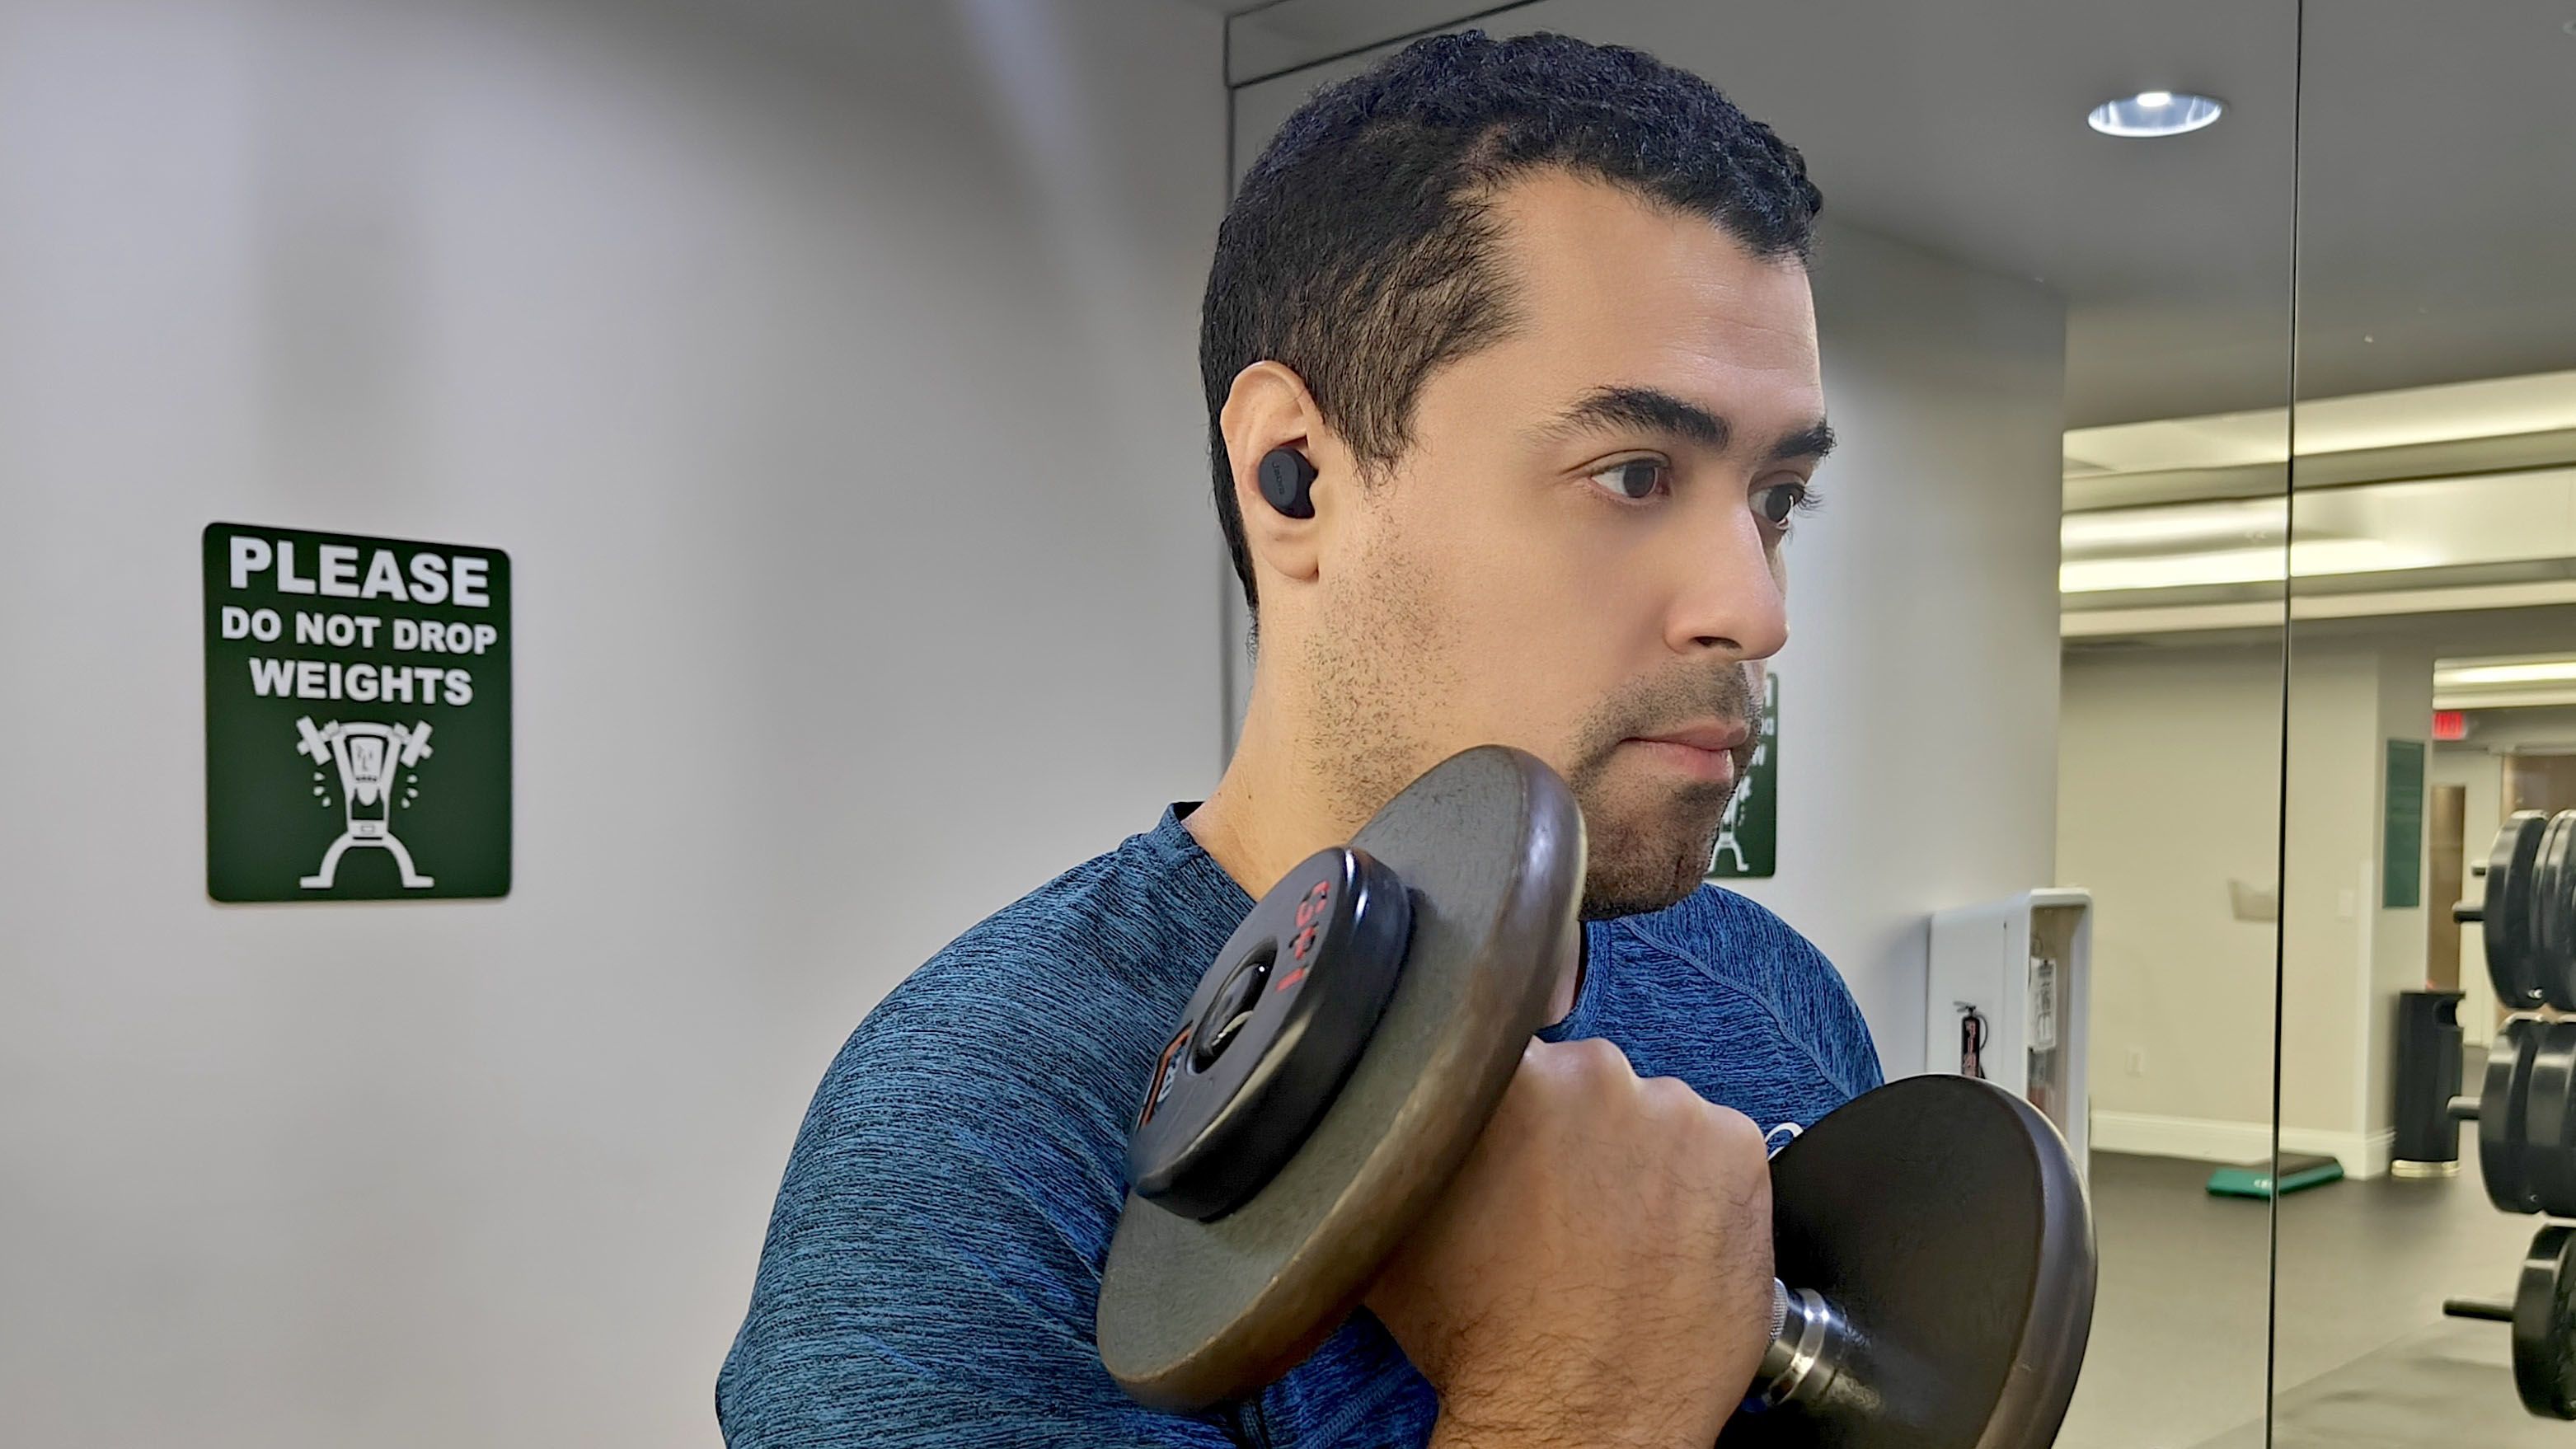 Sweet sounds! The Jabra Elite 8 Active is music to my ears! - Digital  Reviews Network